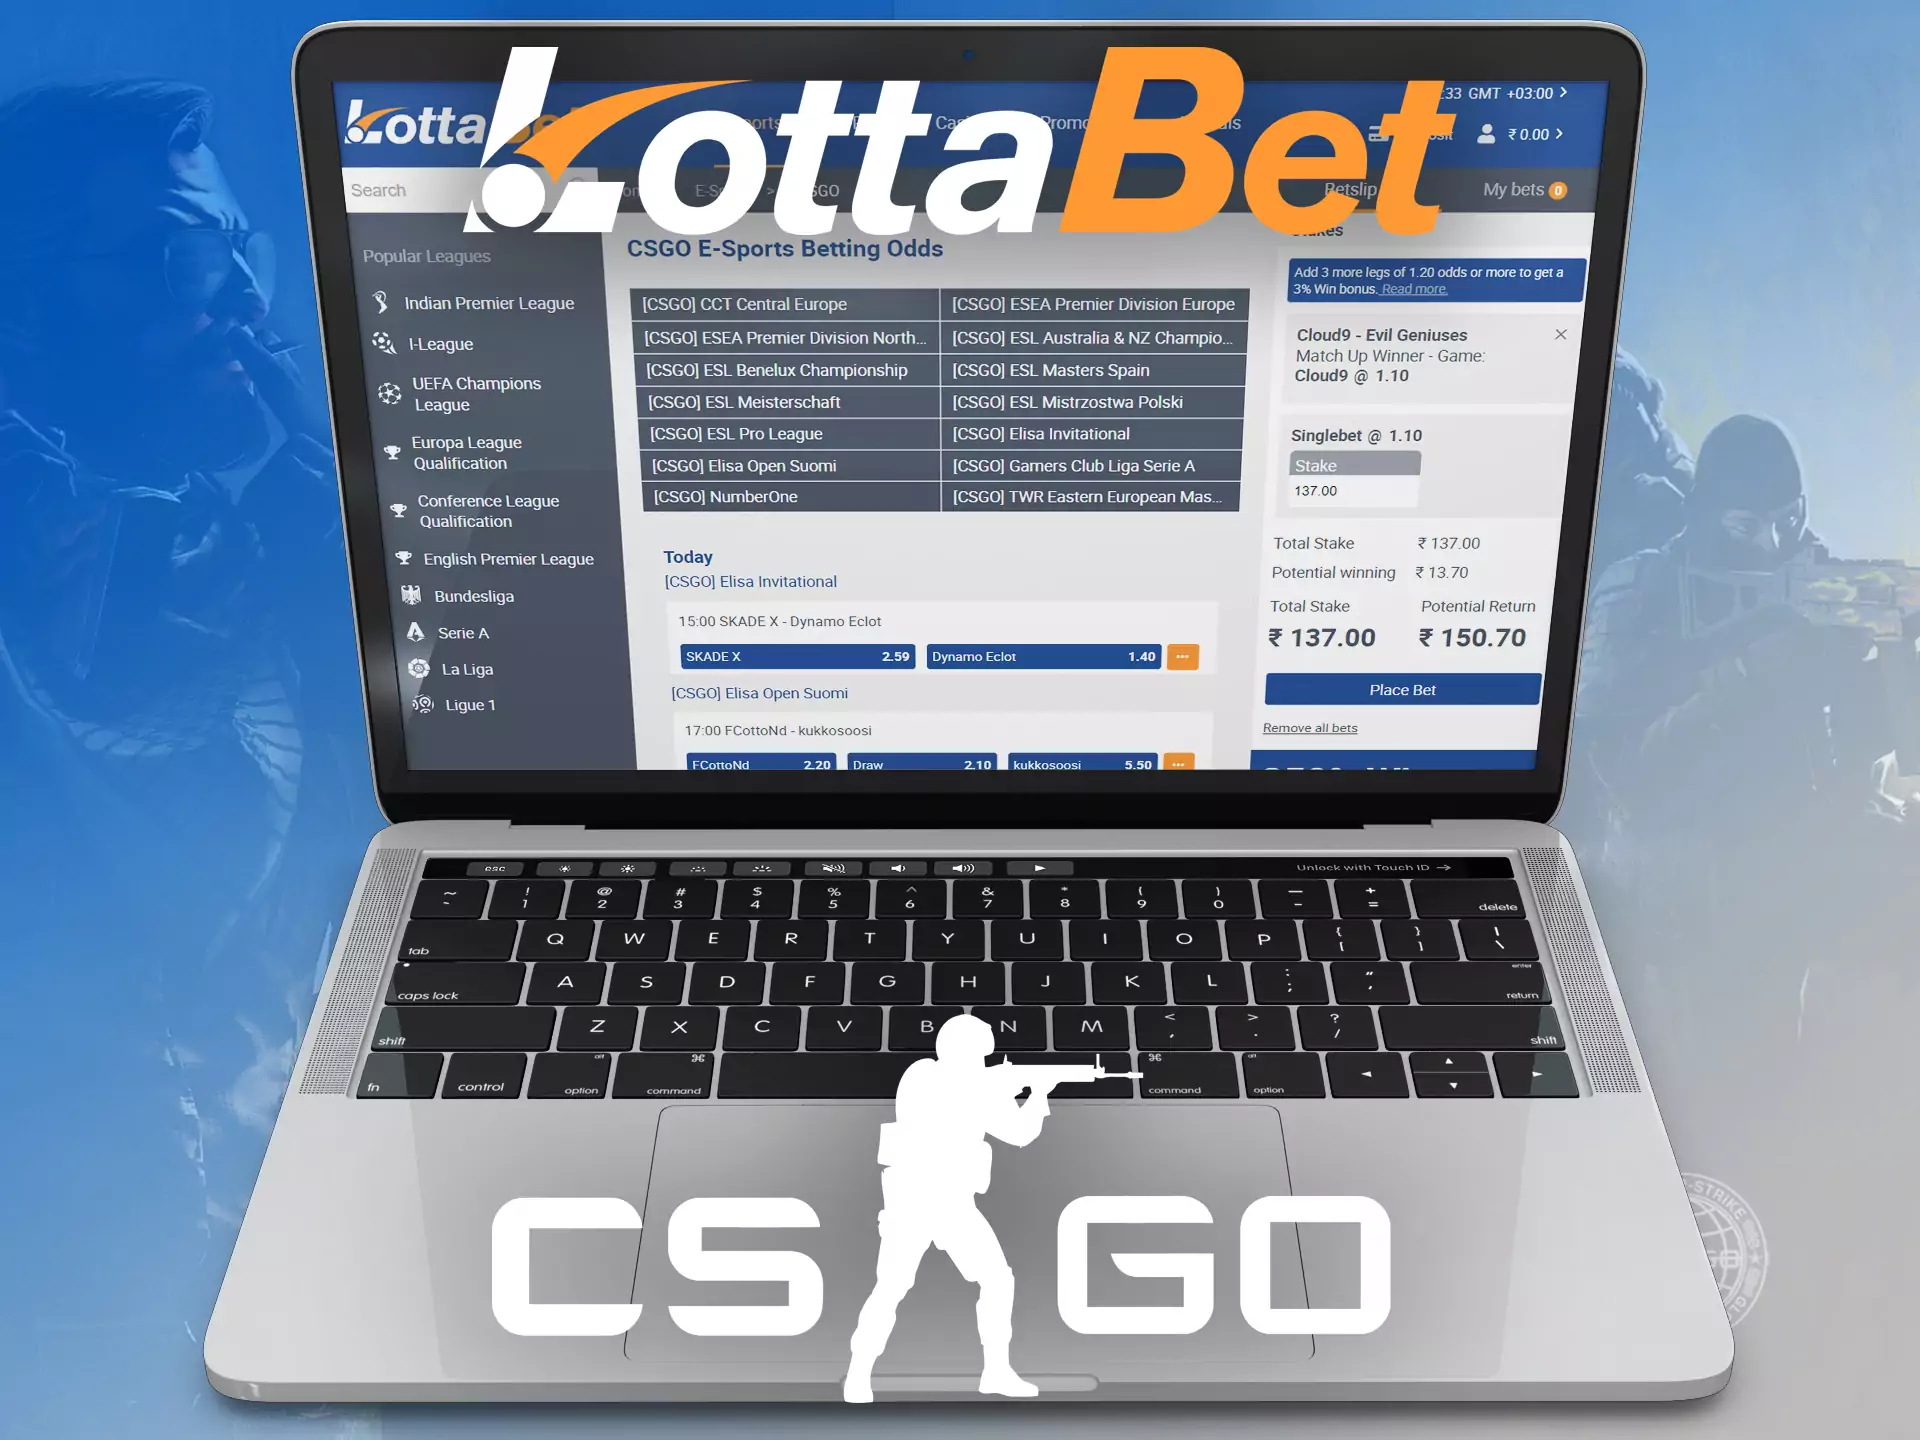 In the esports section on Lottabet, there are lots of CS:GO events available for betting.